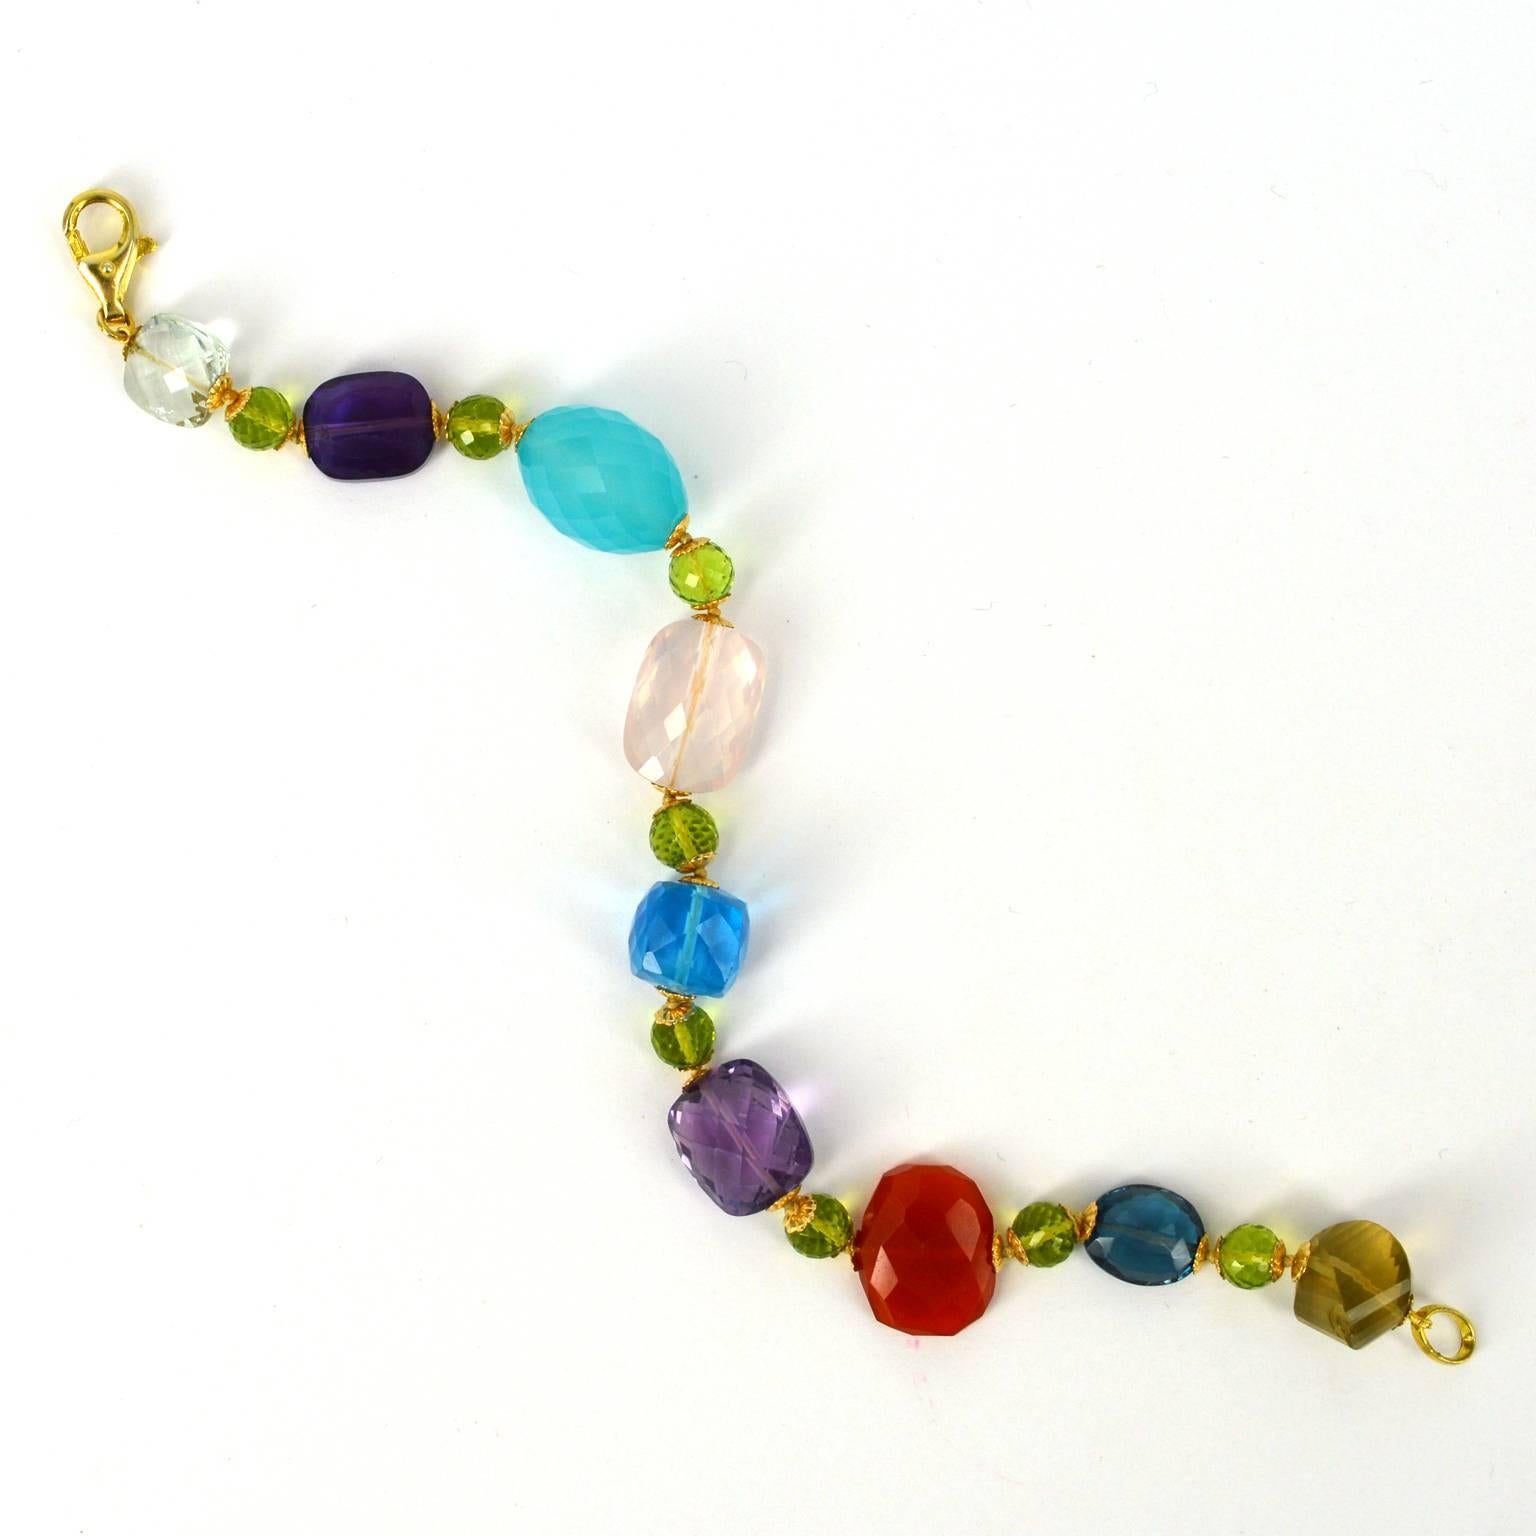 A mix of gemstones in all shapes and sizes make this piece really interesting. 
Amethyst beads, Lemon Quartz, Rose Quartz, Chalcedony, Peridot, London Blue Topaz and Green Amethyst.
Hand knotted on thread with 14k gold filled beads caps and